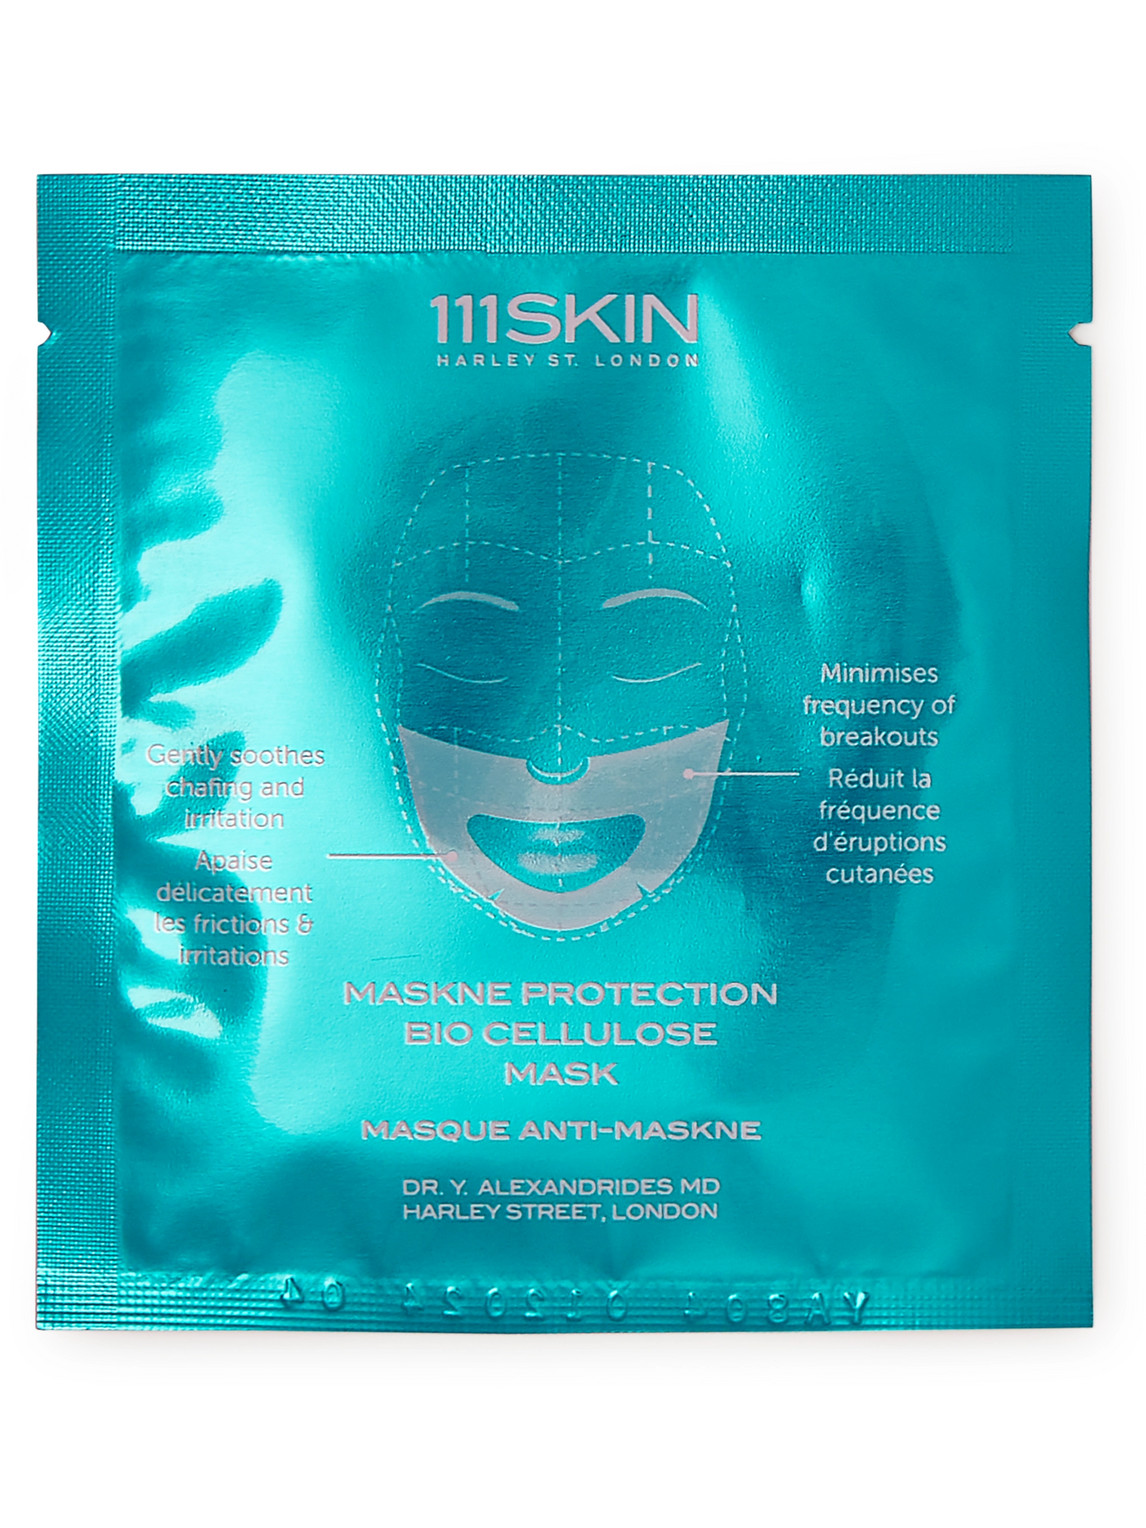 111skin Maskne Protection Bio-cellulose Mask, 5 X 10ml In Colorless